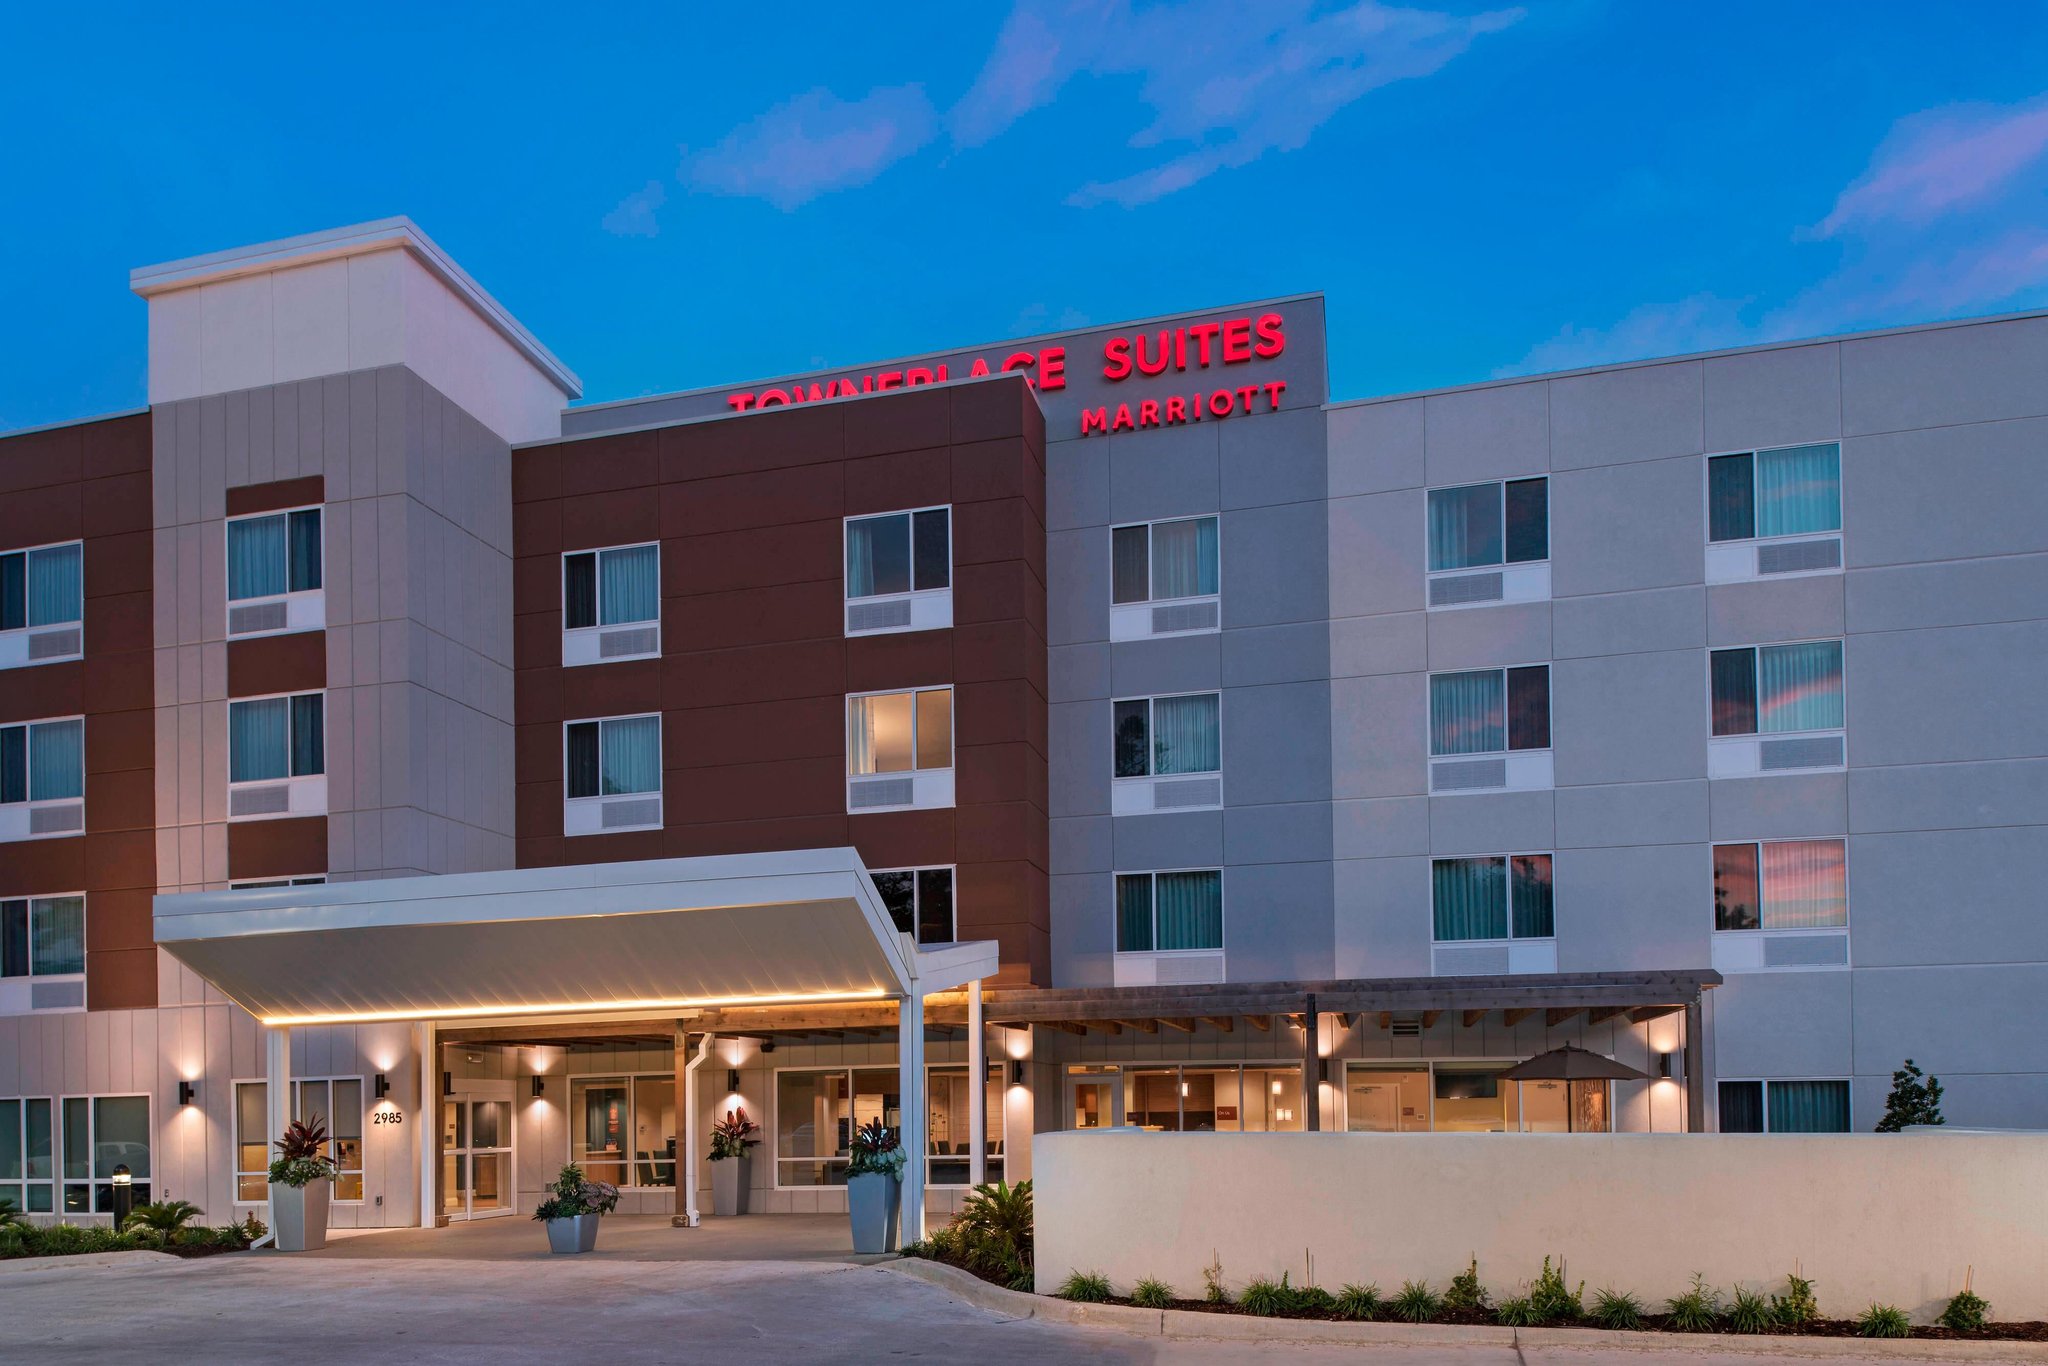 TownePlace Suites Lake Charles